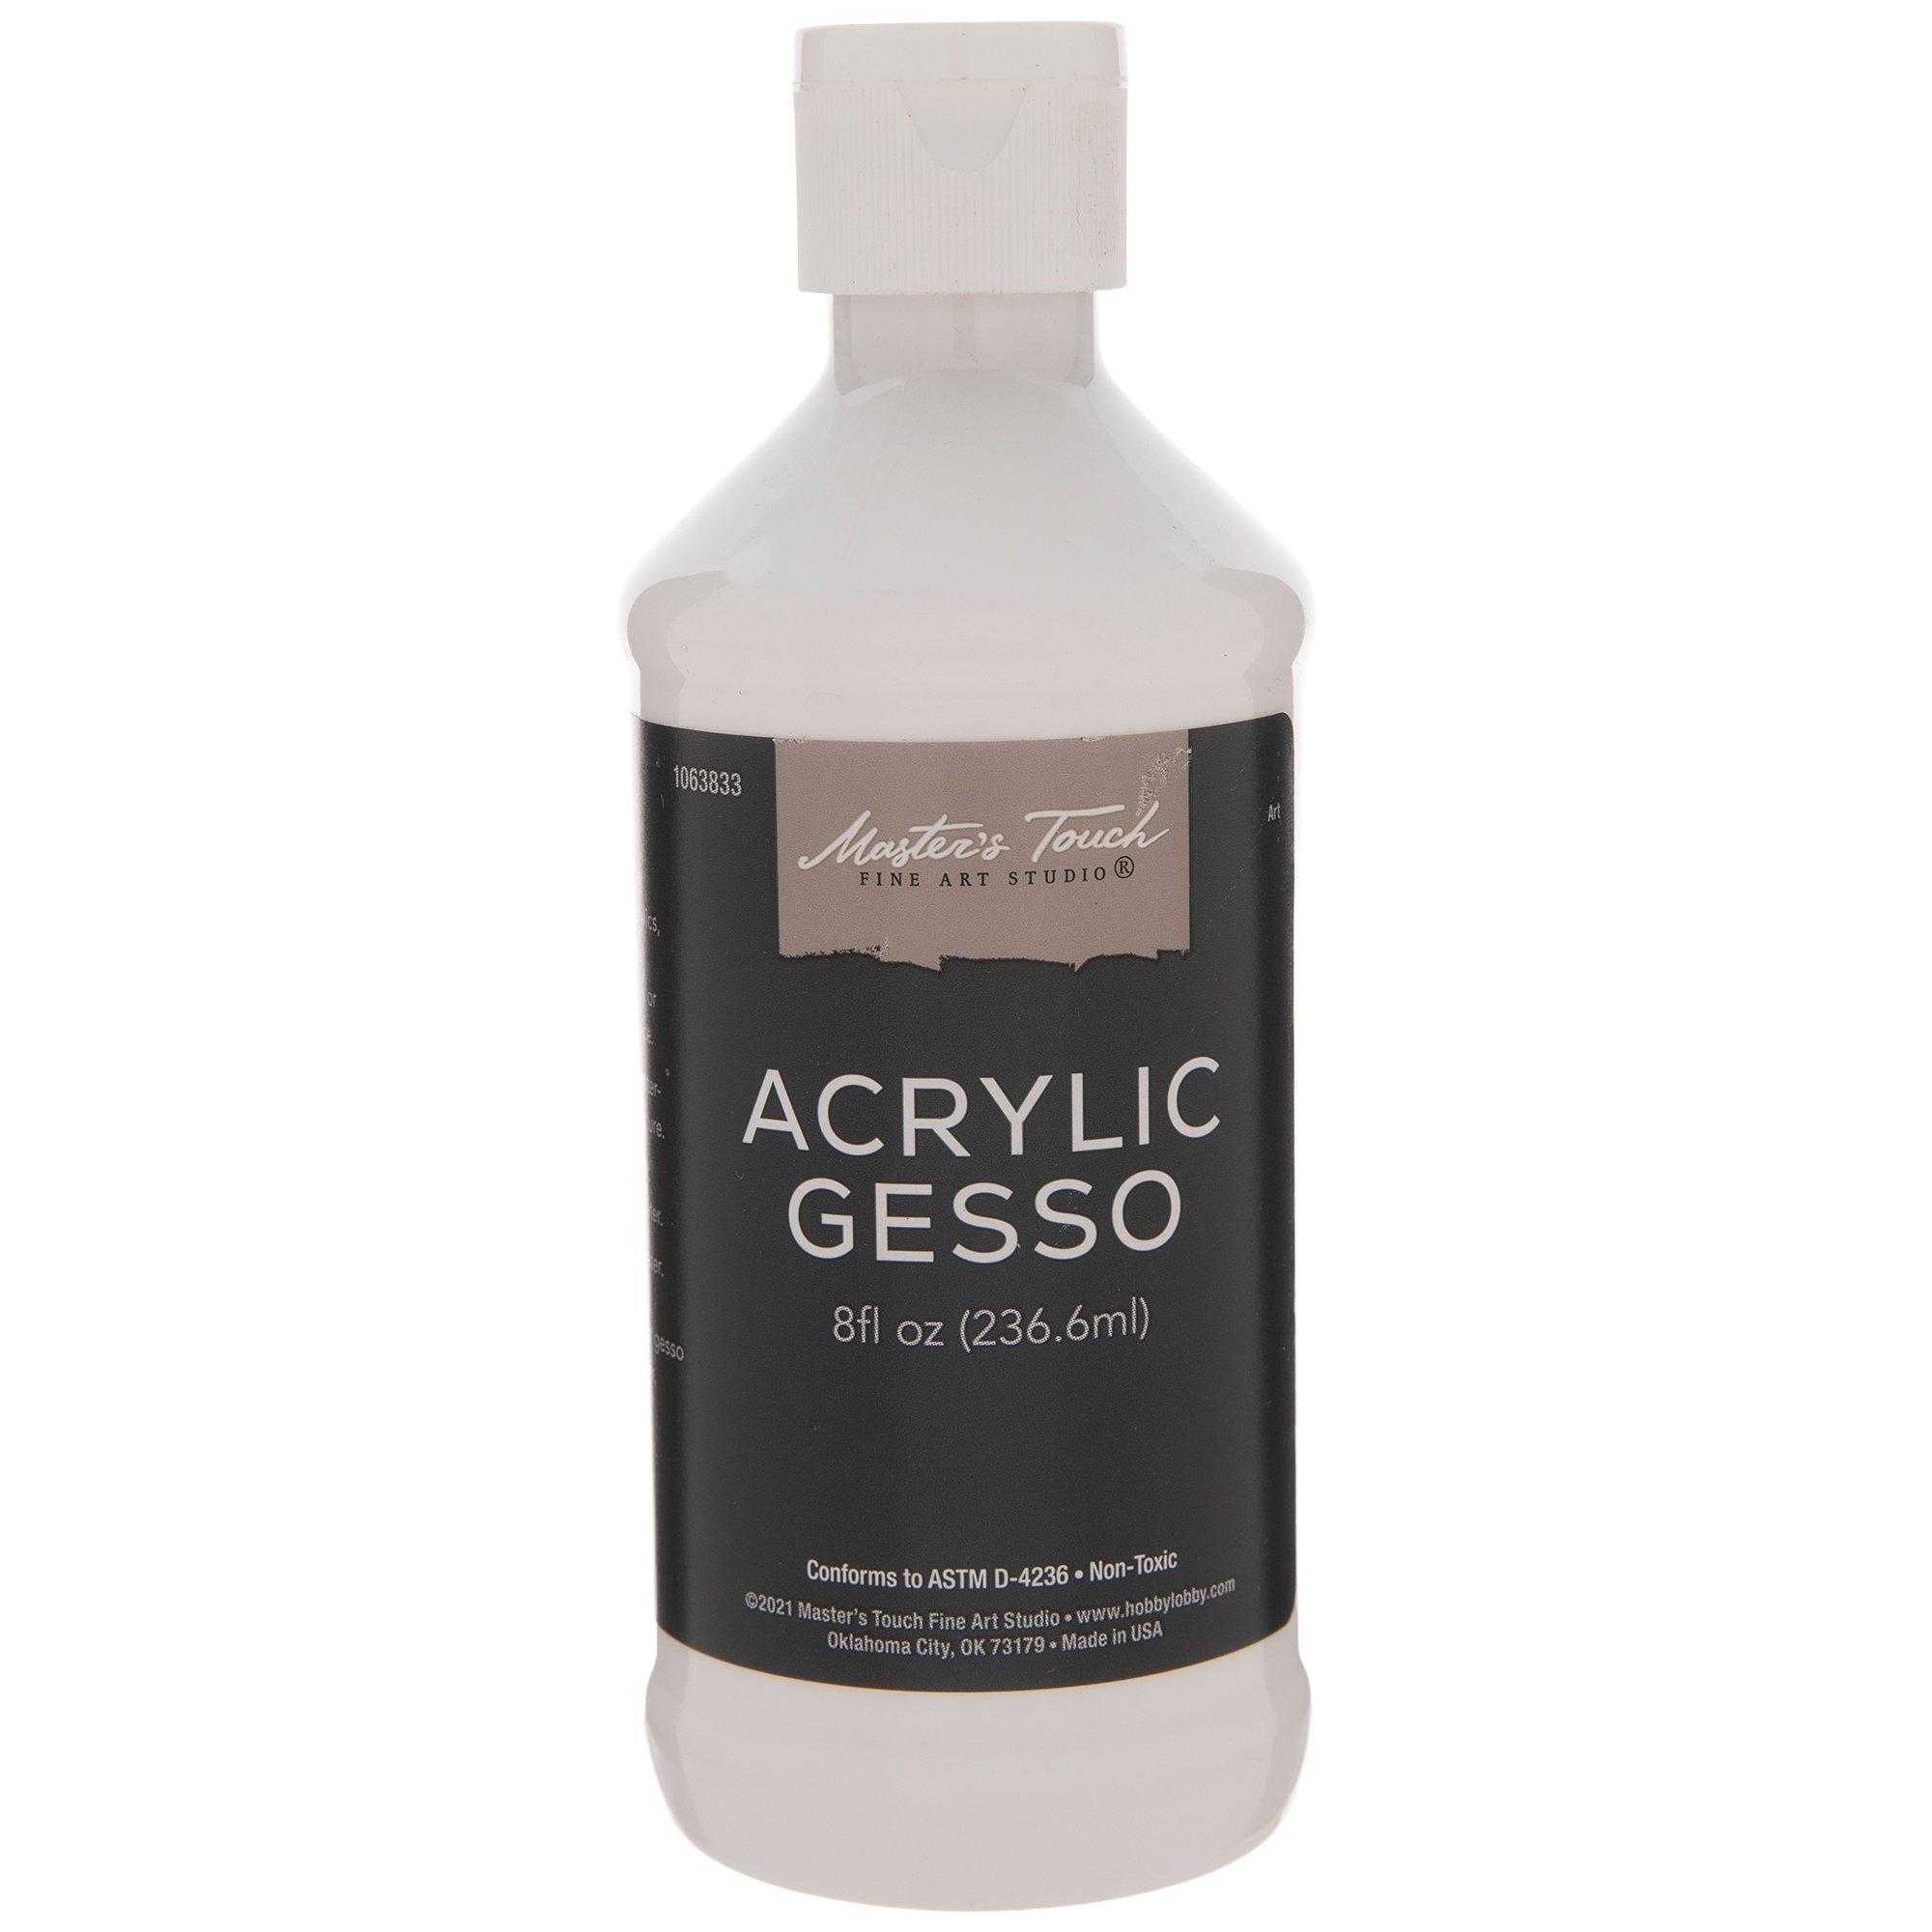 Master's Touch Acrylic Gesso, Hobby Lobby